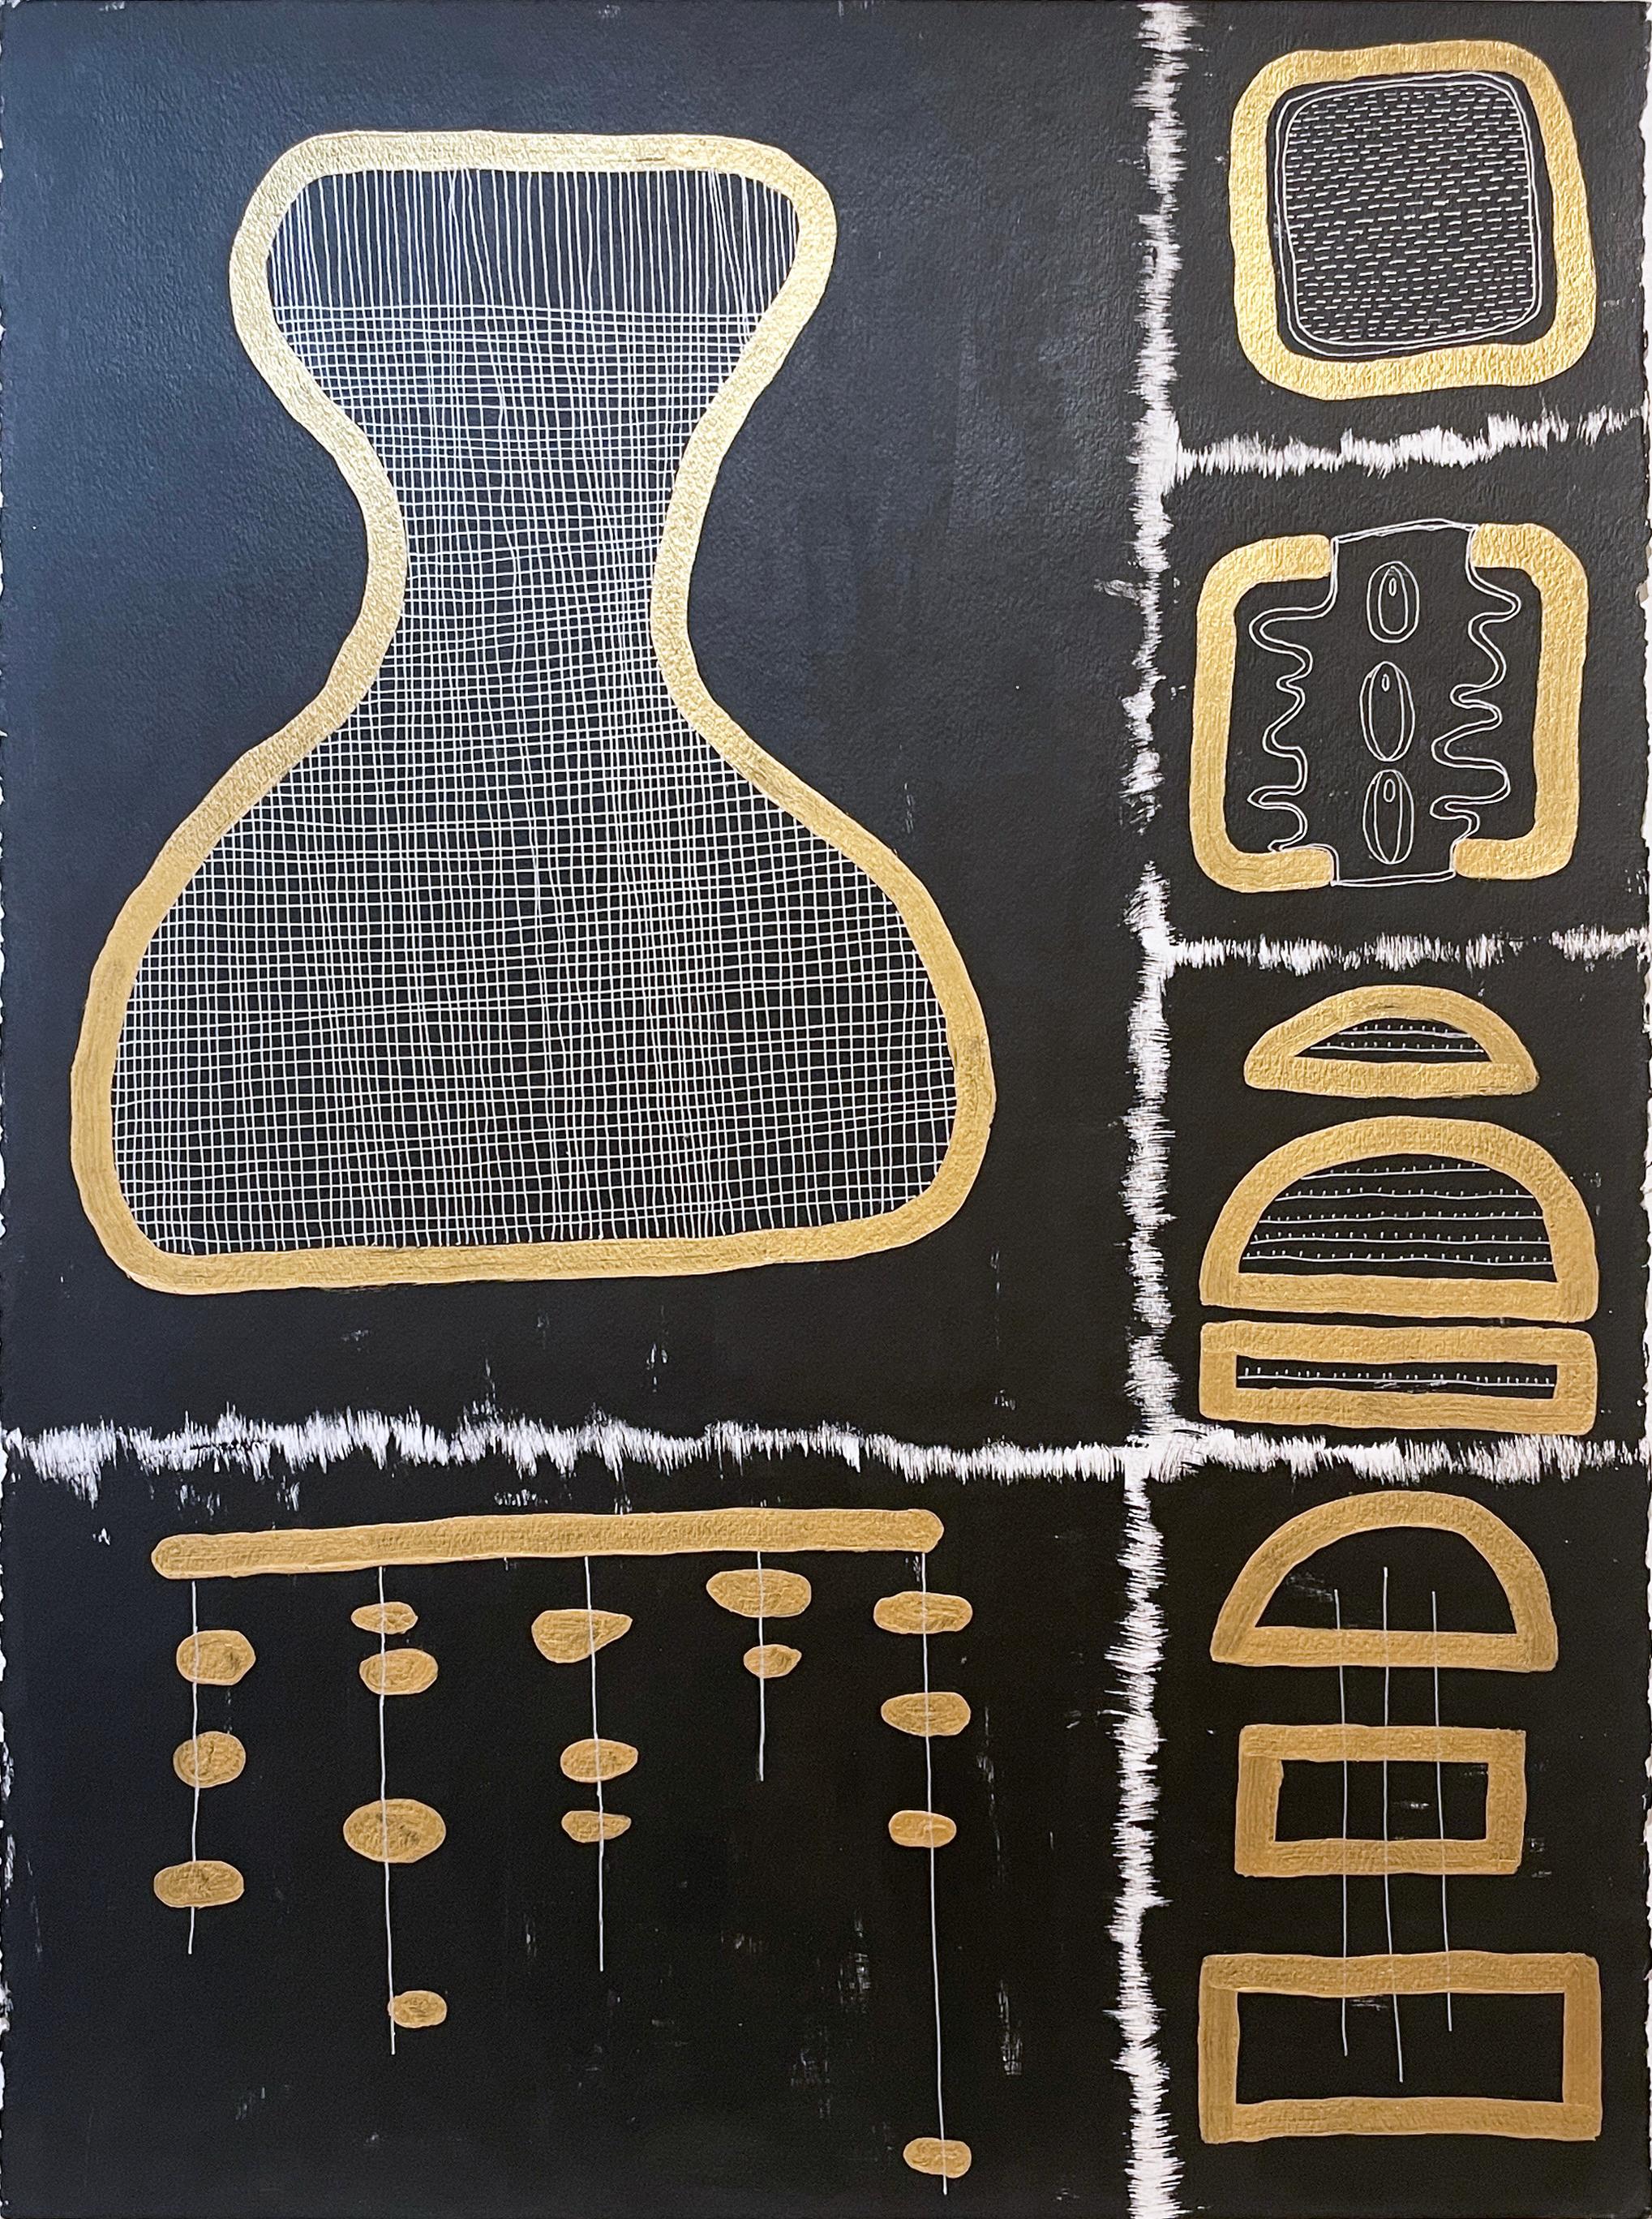 Black & Gold Glyphs II by Cheryl R. Riley
Metallic abstract geometric symbols
Gouache and metallic ink on 140# cold press watercolor paper

Feminist Art and Contemporary Feminist / Geometric Abstraction / Gestural Abstraction / Abstract Art /